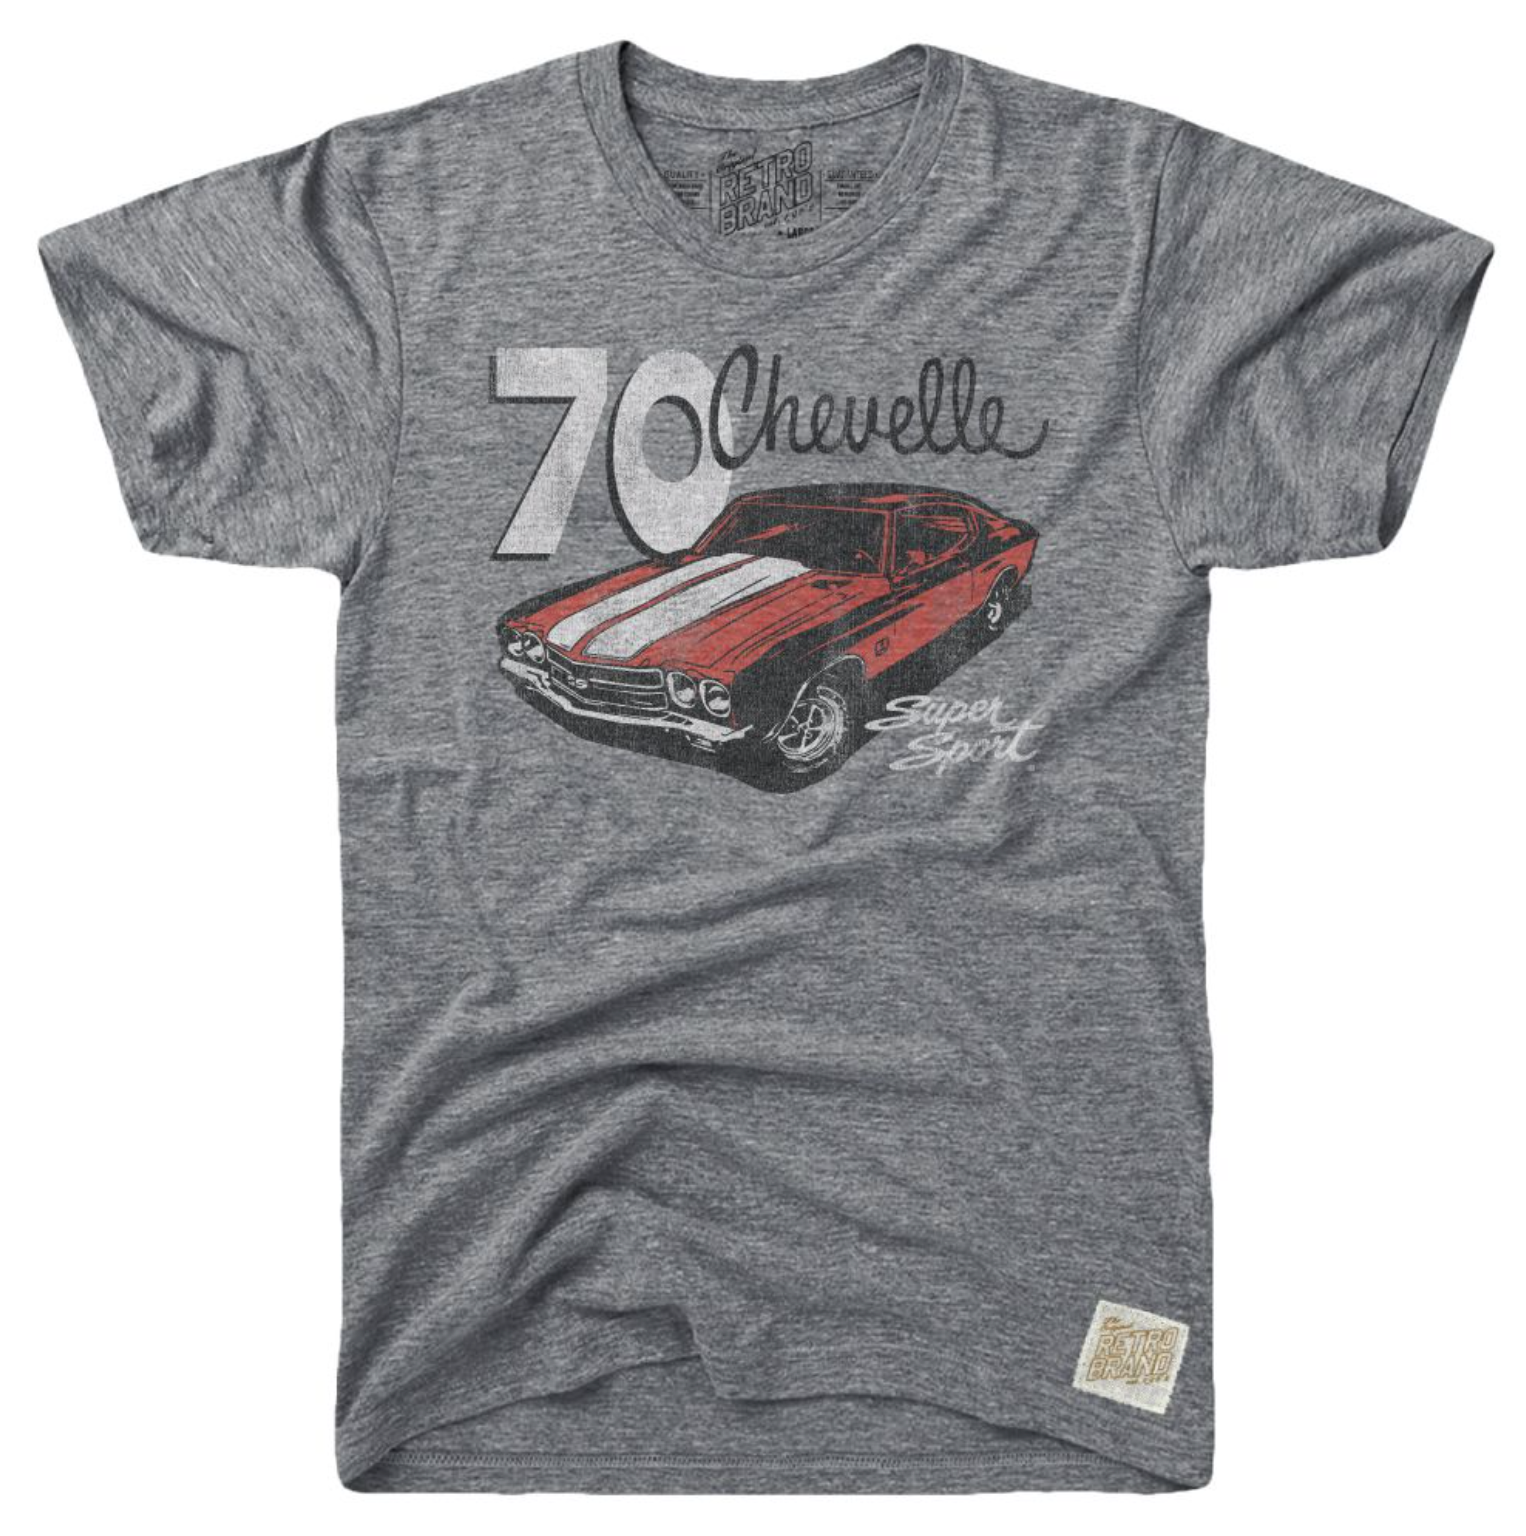 Red 70 Chevelle Super Sport SS (with white hood stripes) on grey tri-blend tee